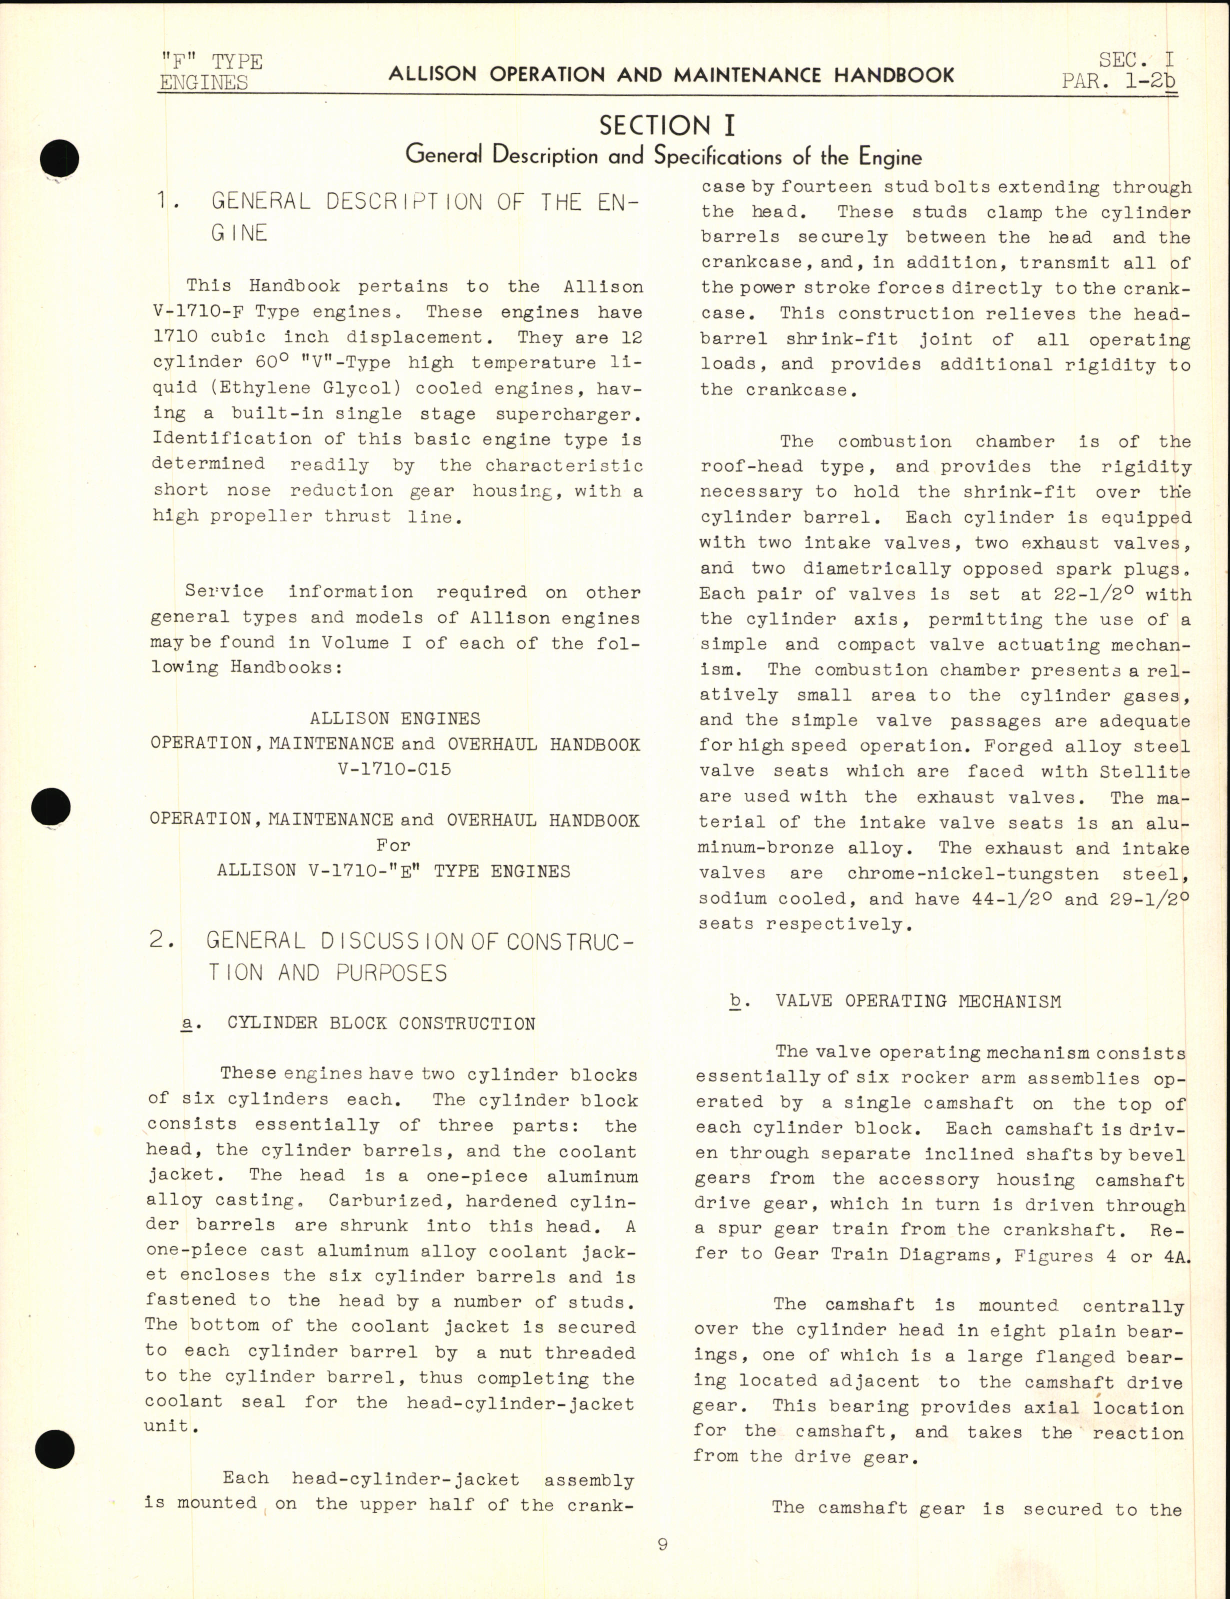 Sample page 13 from AirCorps Library document: Operation Maintenance and Overhaul Handbook for V-1710 